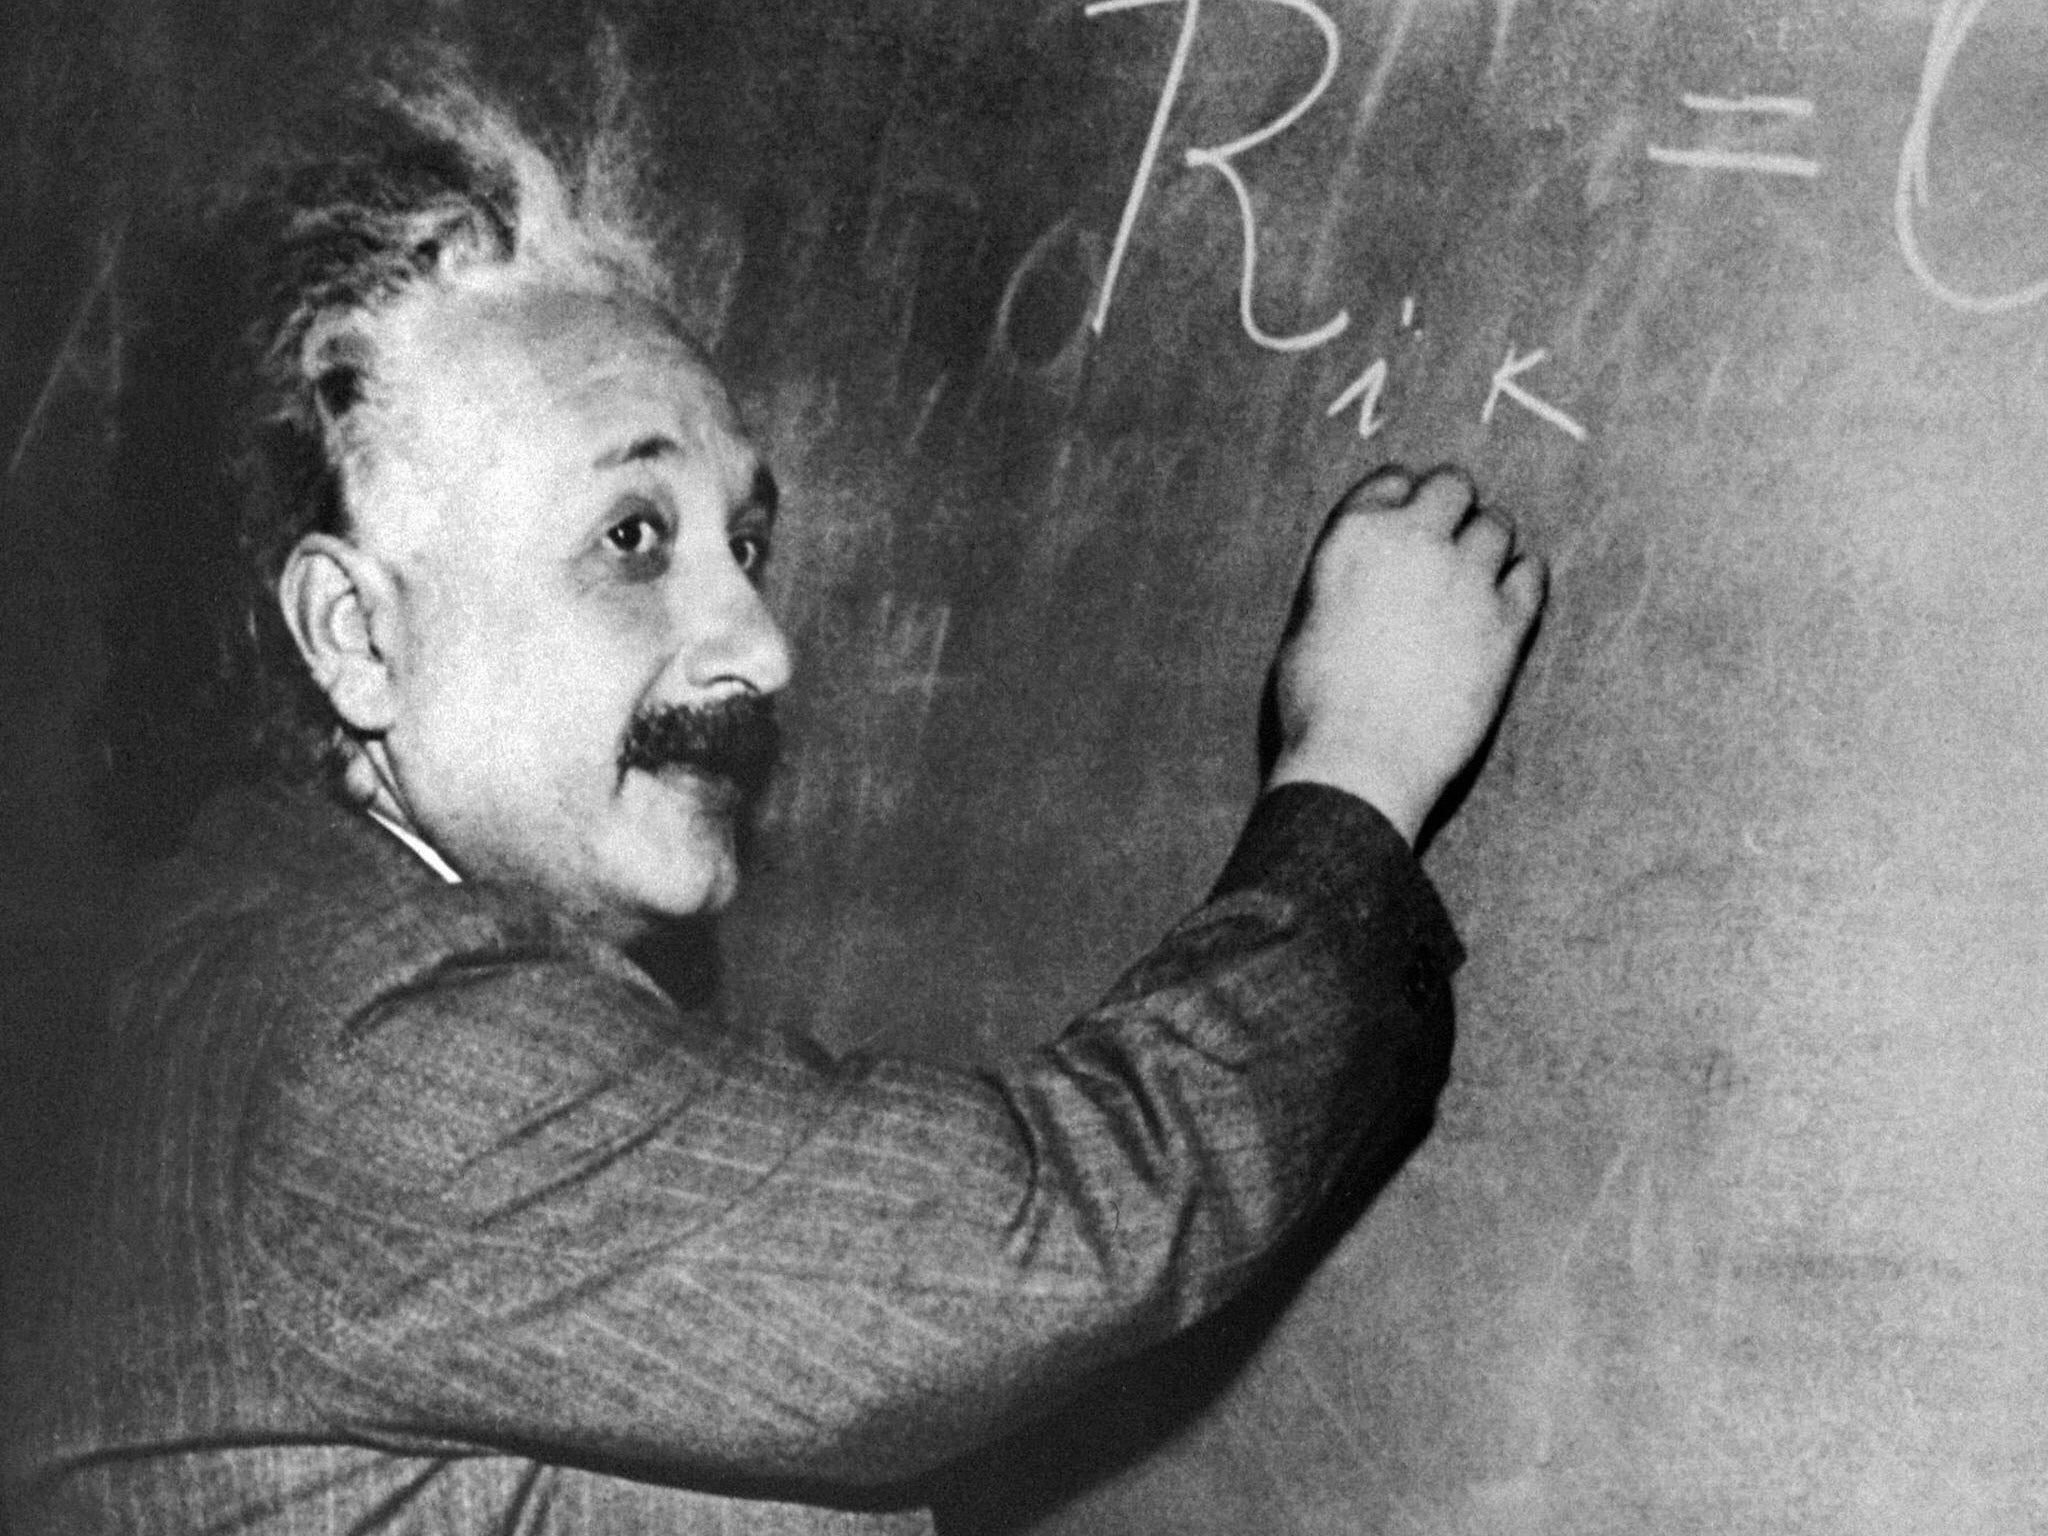 The video explained physicist Albert Einstein's idea of relativity in an accessible form